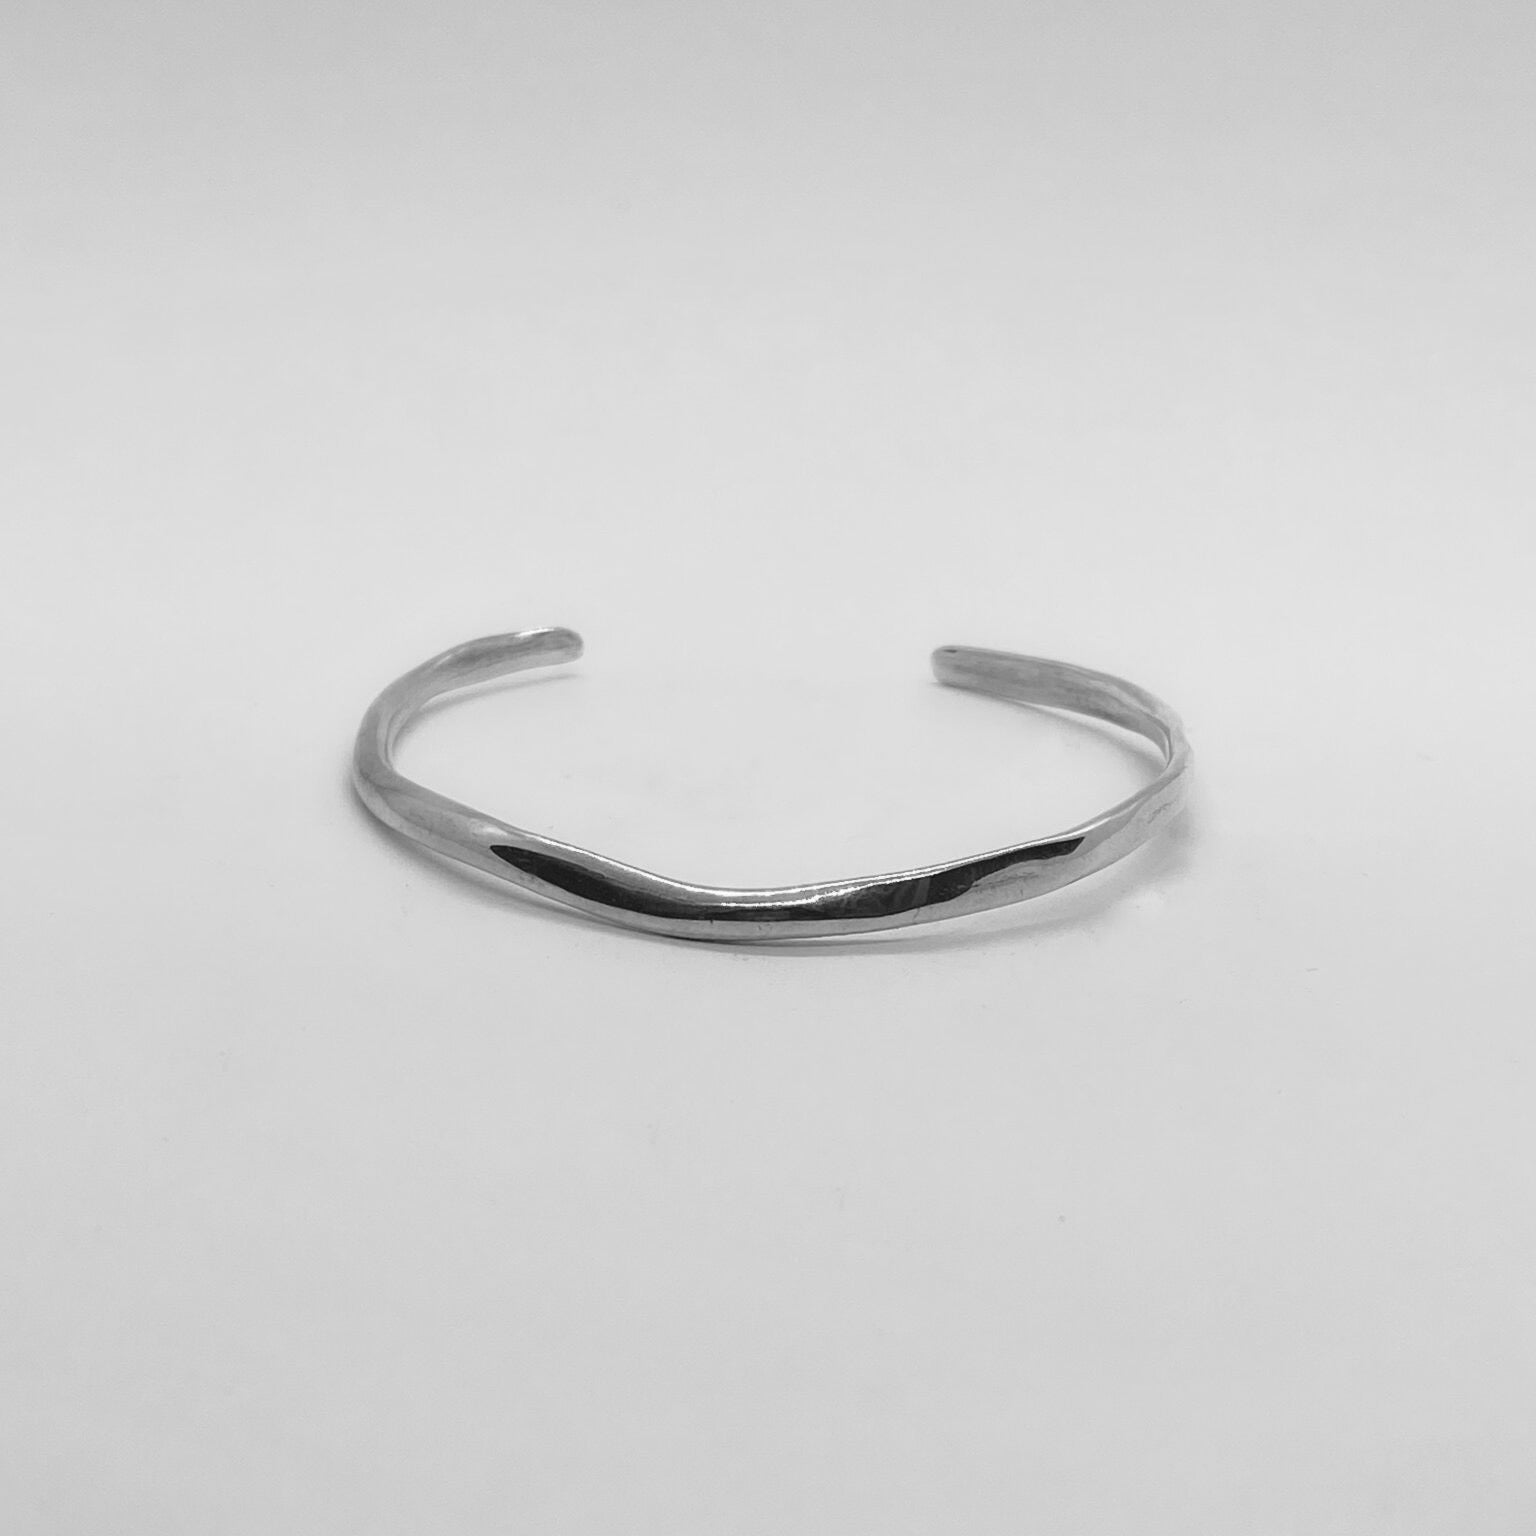 The Branch bracelet is a handmade creation crafted from sterling silver 925, featuring an exquisite and delicate minimal design. It gently fits low on the wrist, providing a smooth and glossy sensation.